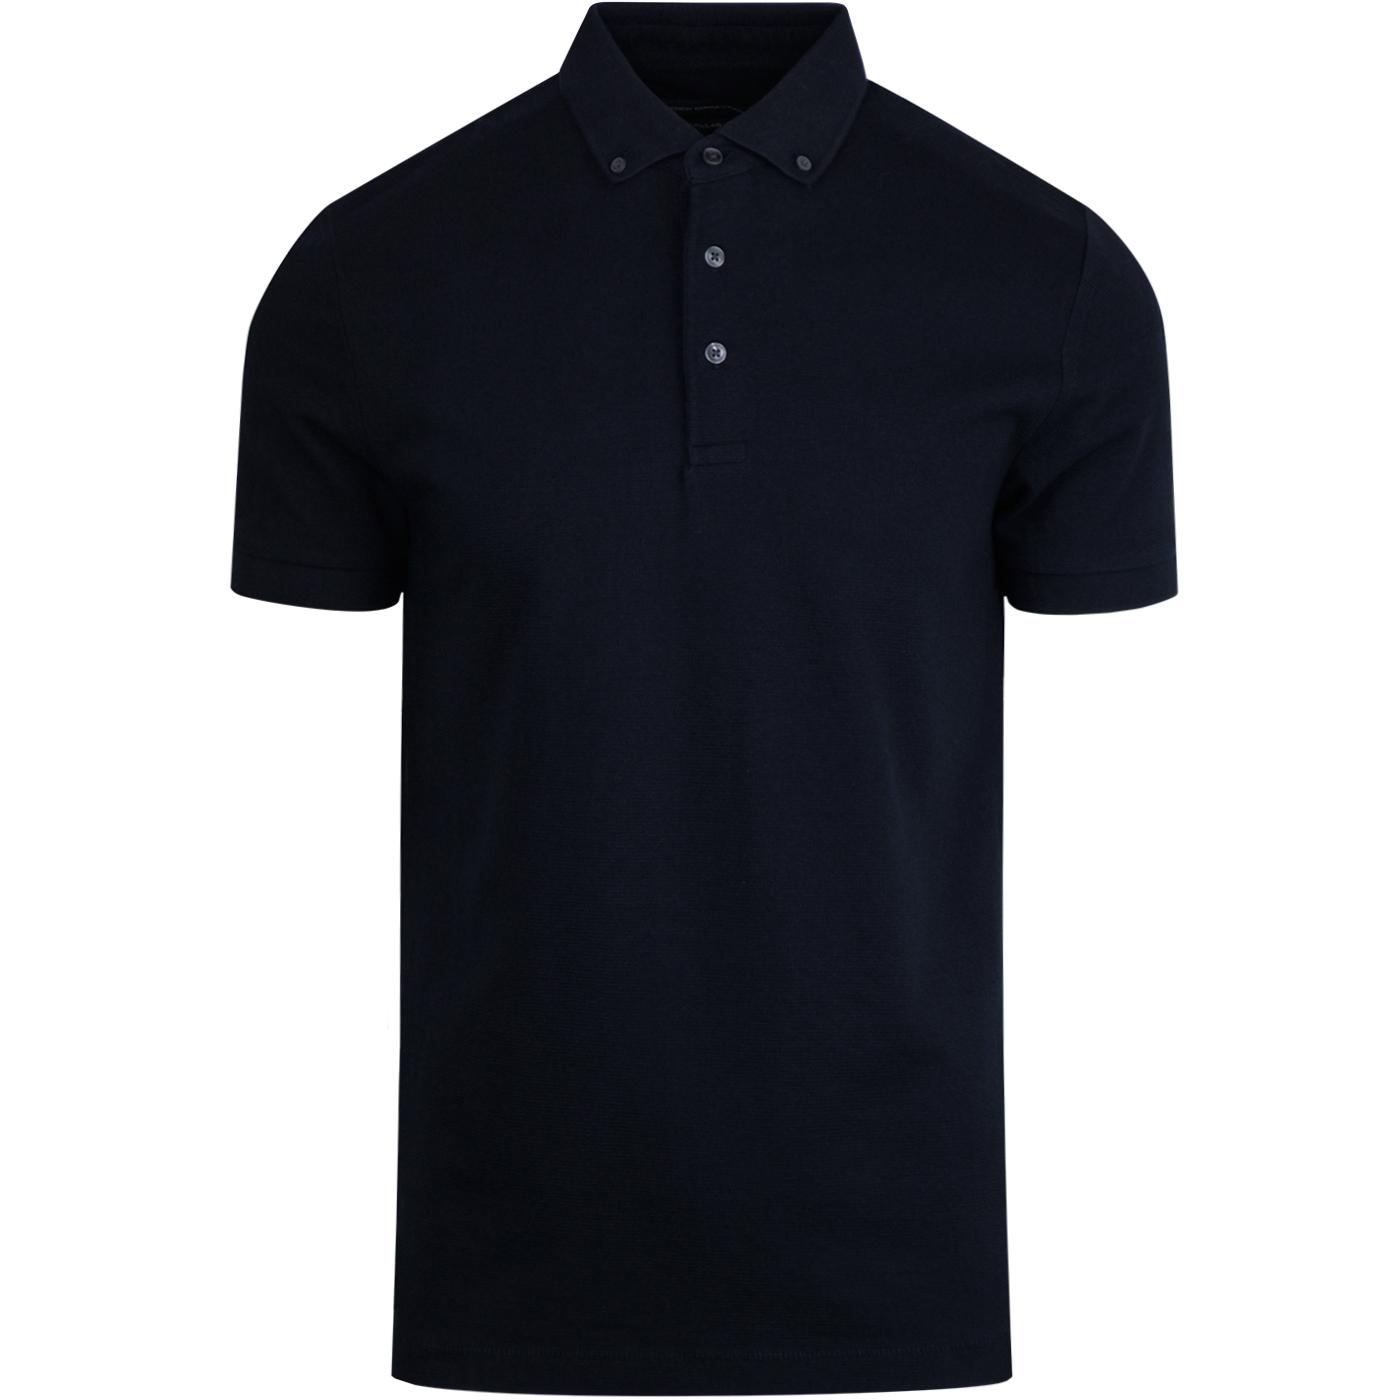 FRENCH CONNECTION Parched Mod Textured Polo in Marine